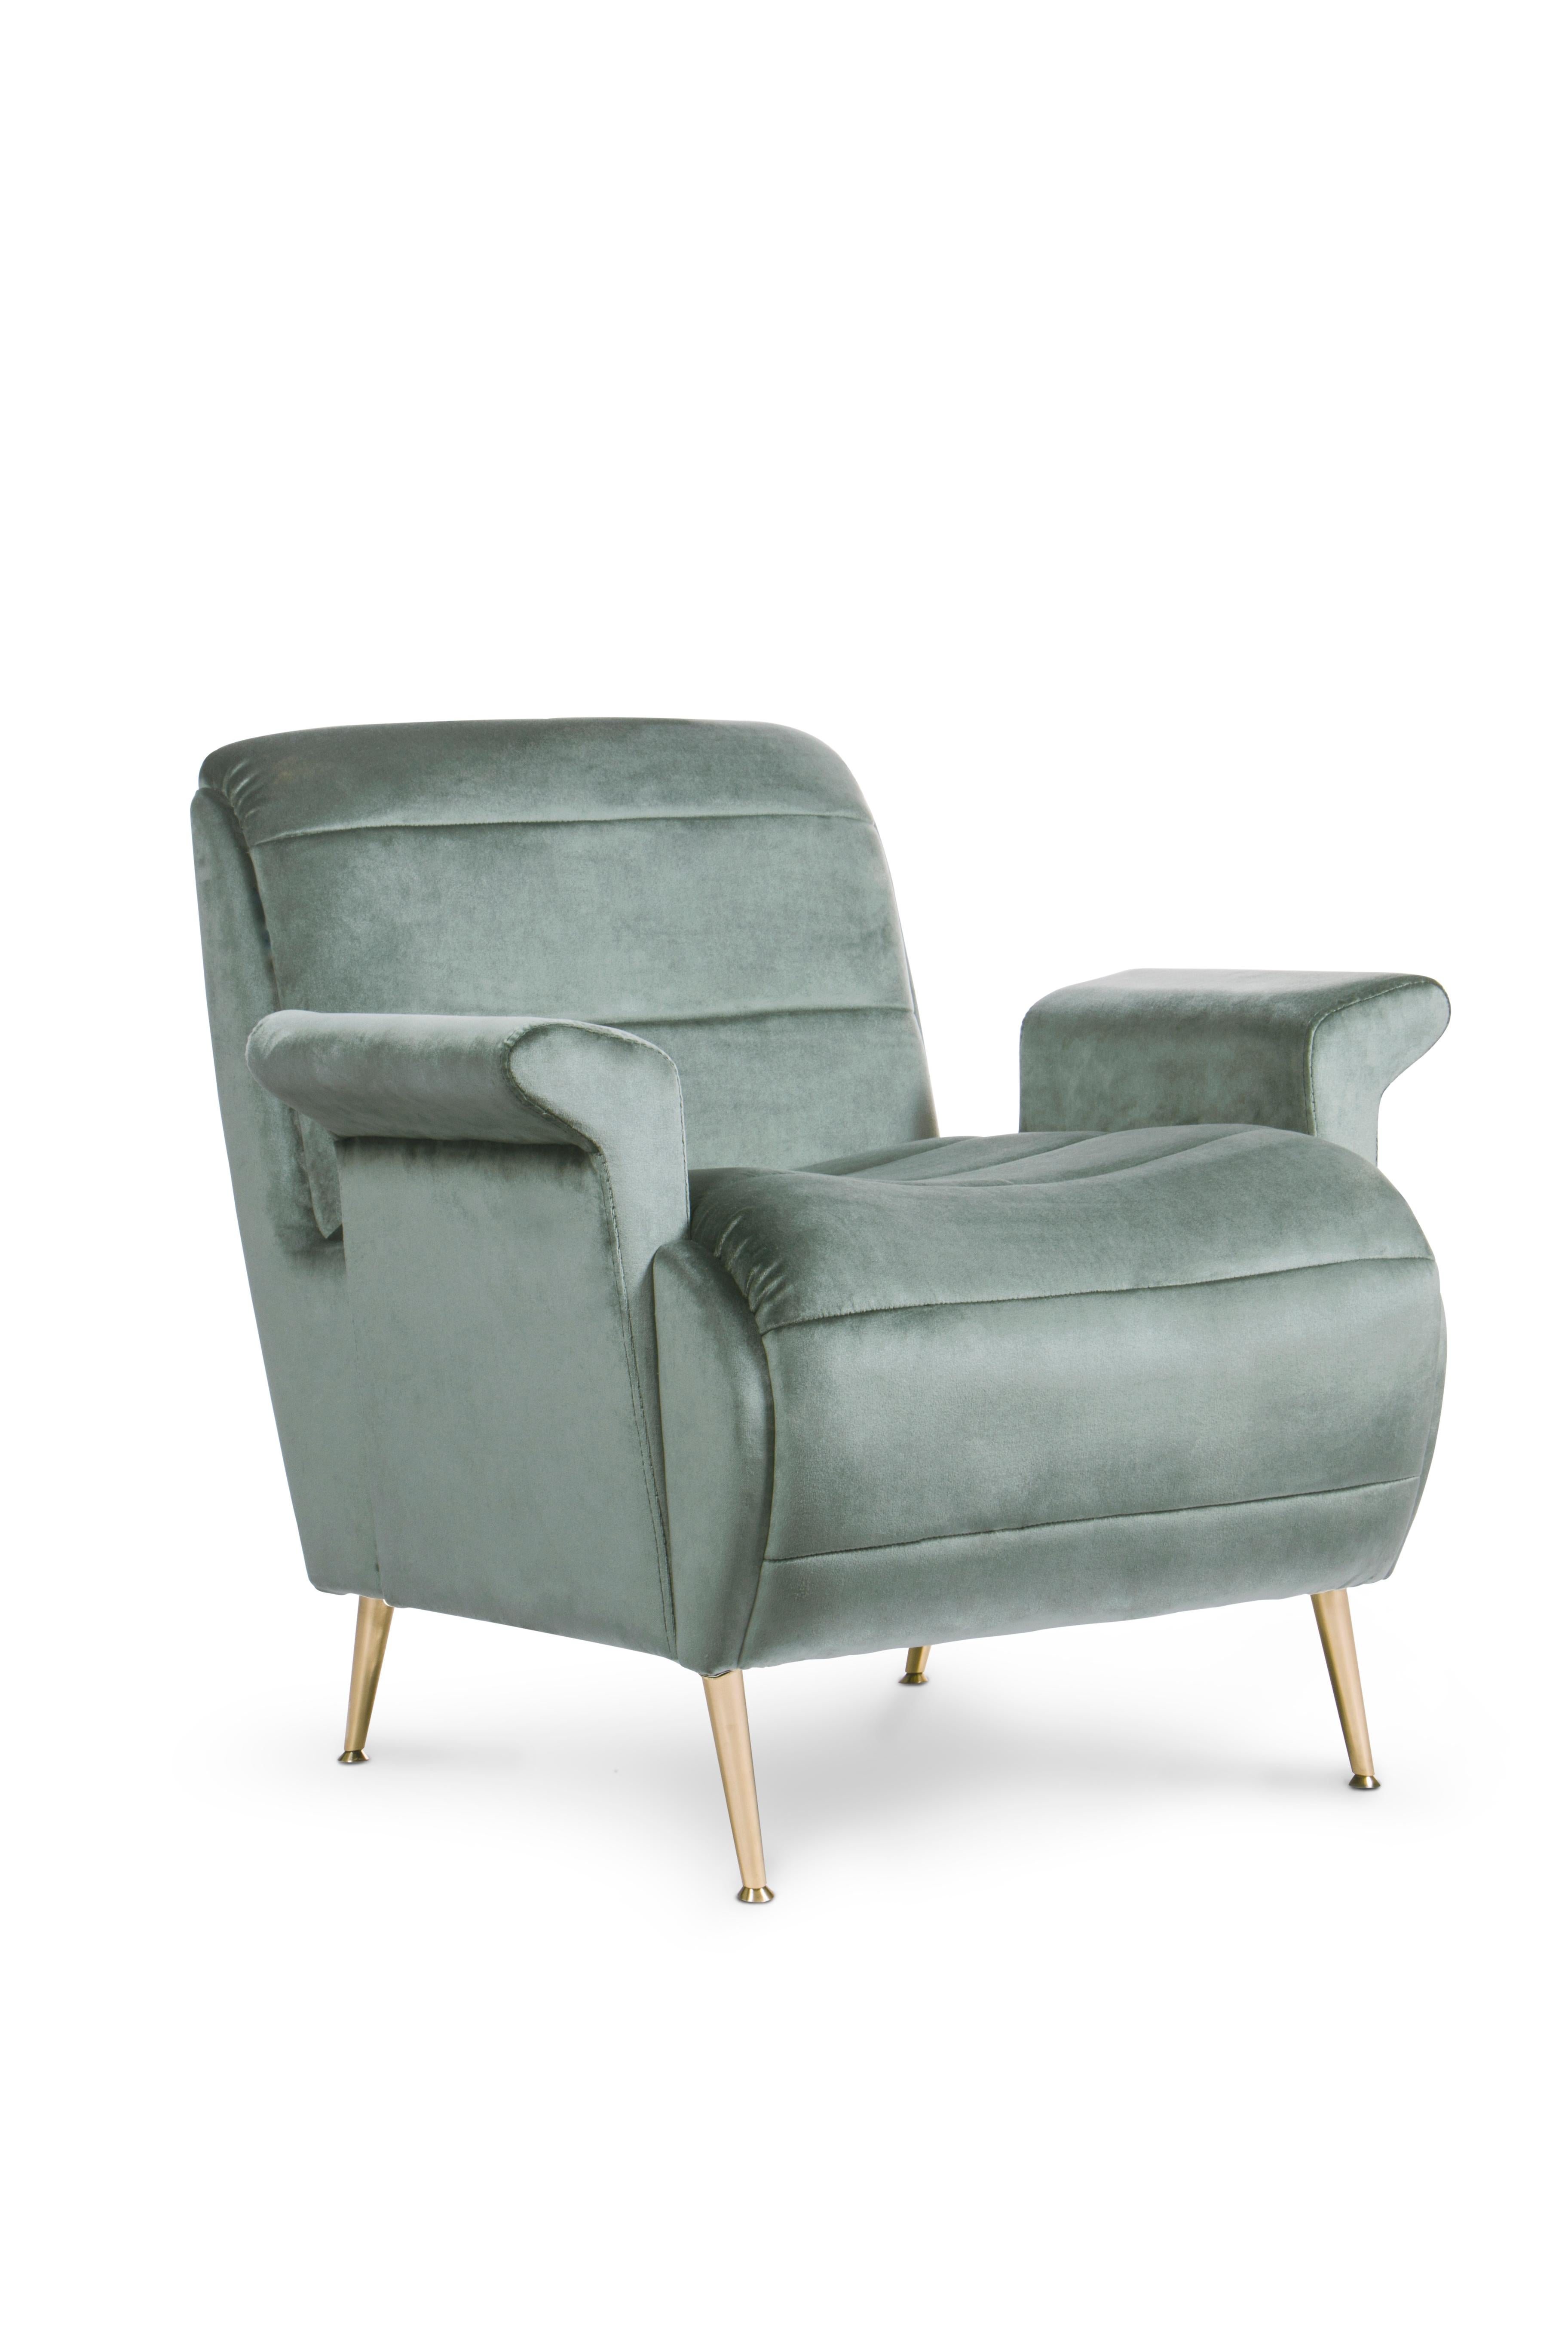 Inspired in the feminine silhouette of Brigitte Bardot, this armchair boasts modern contours, both on the slightly reclined back and on the rolled seat. It is upholstered in velvet and features tiny tapered legs in polished brass. The key shape of